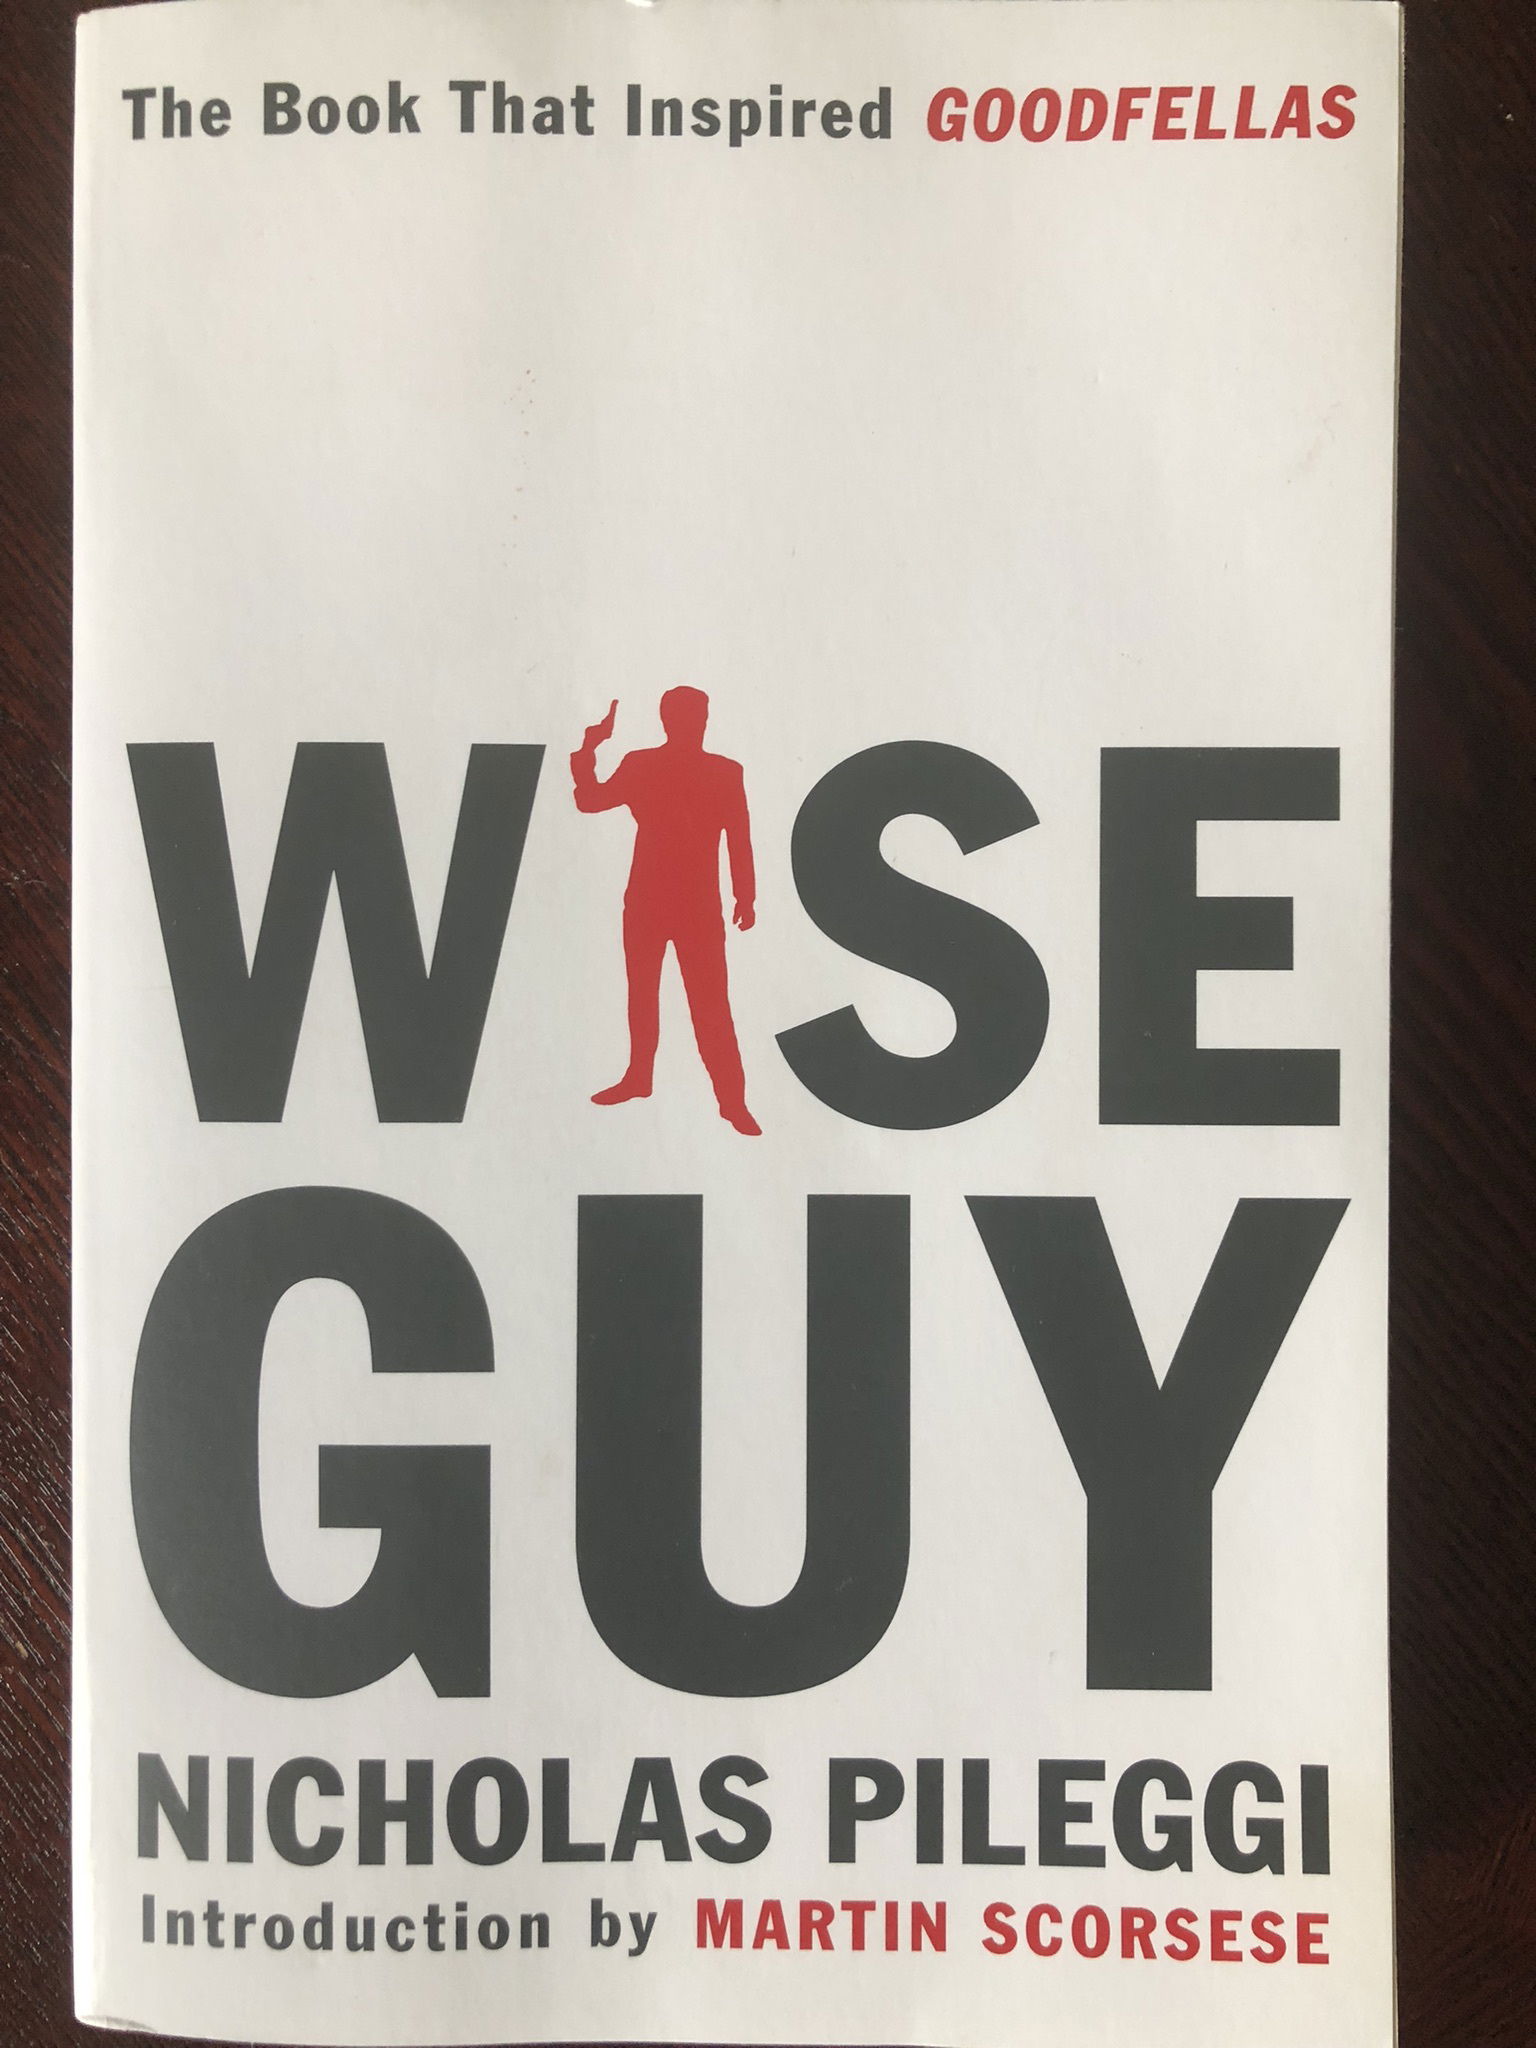 “Wiseguy” A Book Report   “Wiseguy” is a non-fiction book written by Nicholas Pileggi, published in 1985. The book is based on the life of Henry Hill, a mobster who worked for the Lucchese crime family in New York City. The book details Hill’s rise in the mob, his involvement in various criminal activities, and his eventual cooperation with the FBI. Wiseguy is two-hundred and sixty-three pages. I remember reading that Martin Scorsese was in the airport and needed something to read on the plane. He picked up the book Wiseguy and supposedly that is how it all began. Scorsese received an Academy Award for Best Director for Goodfellas in 1990. It goes into detail of the way organized crime operated in the 1980’s. There is much more information in the book than the movie allowed. How young Henry became involved in selling cigarettes and the downfall of that endeavor. Who had Tommy Desimone killed and why? It’s a great read and Nicholas Pileggi is a talented writer. He has stories which came right from the actual characters you saw on screen. If you are into gangsters and you never read Wiseguy, then you owe to yourself to read it. It is definitely a classic. We all know that Goodfellas was a classic and a hit movie. However, reading the book is an eye opener.